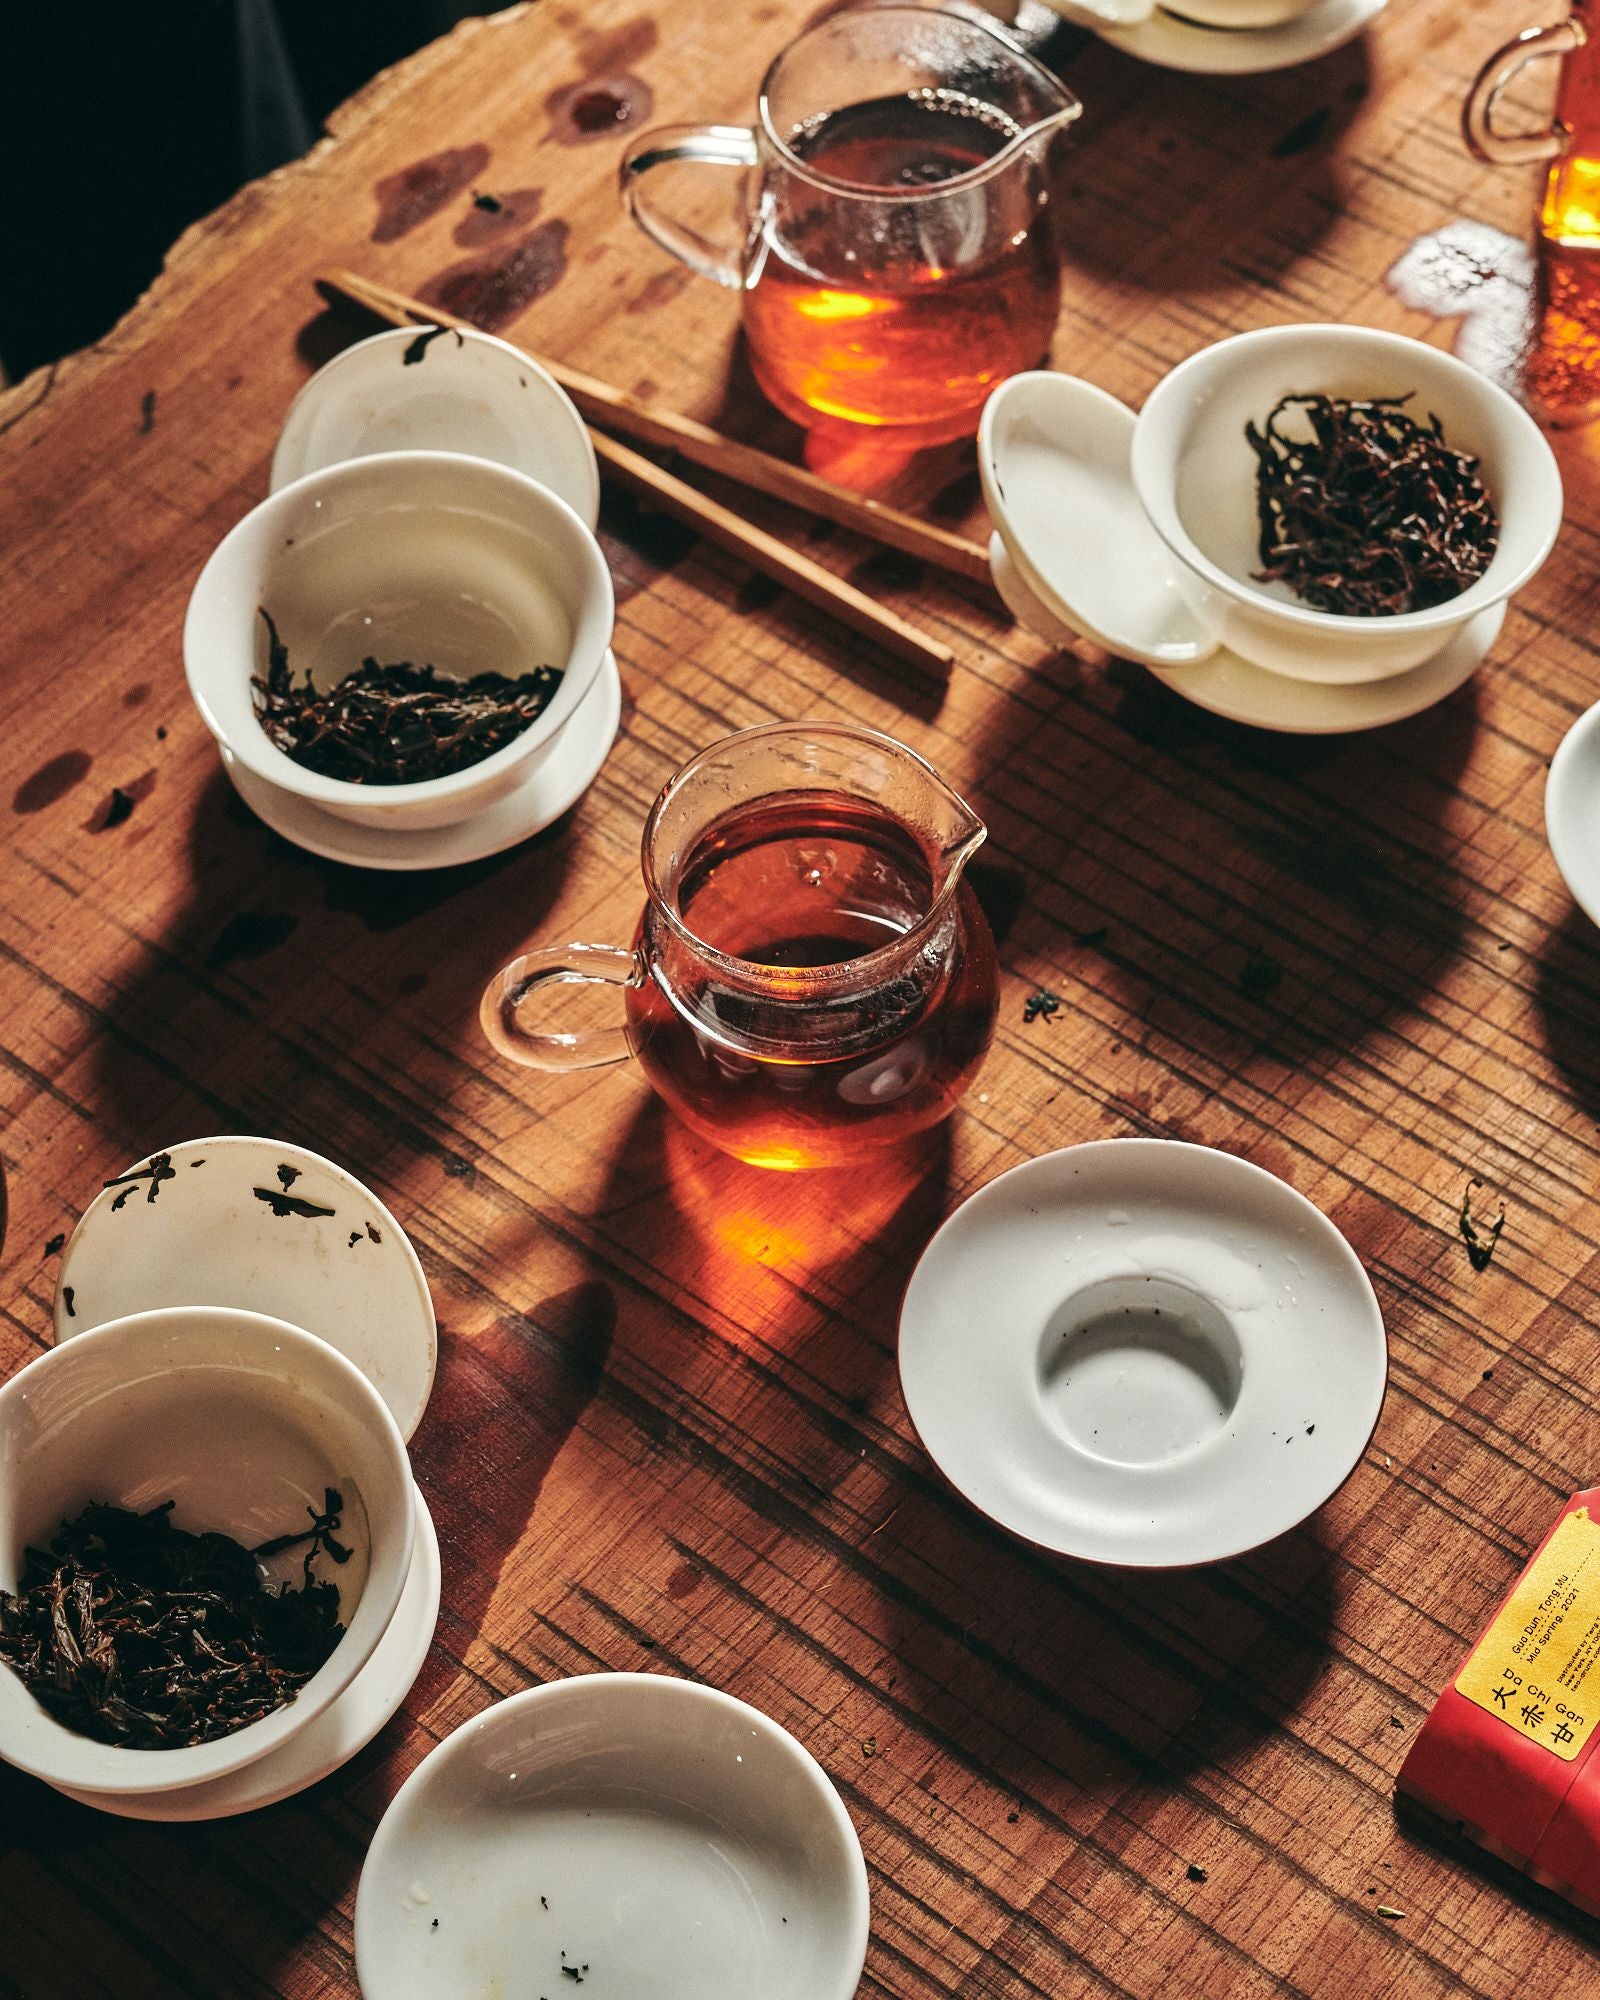 Why Gongfu? A Practical Exercise for Better Tea Brewing – In